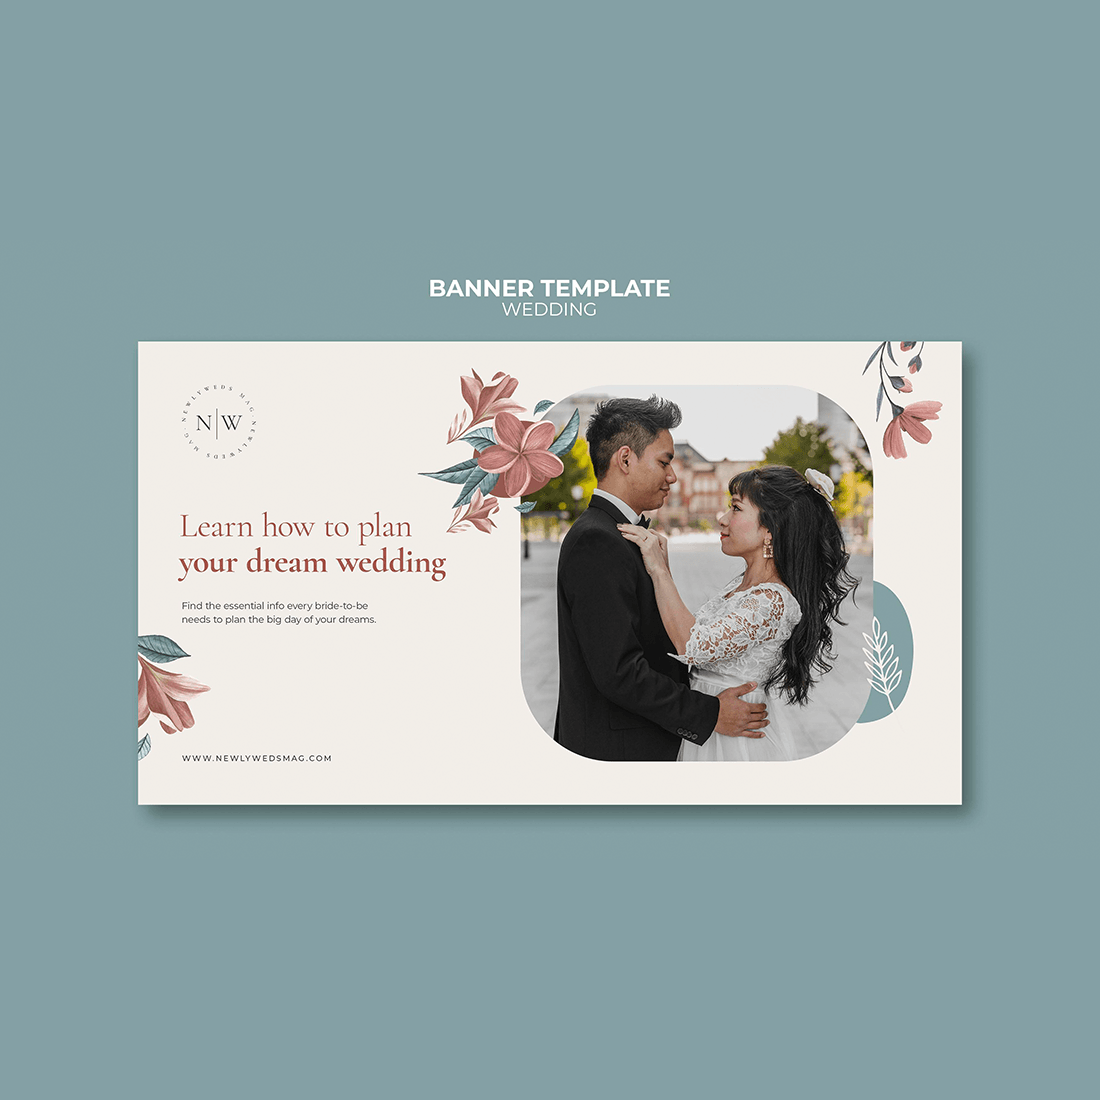 WEDDING BANNER TEMPLATE preview image.